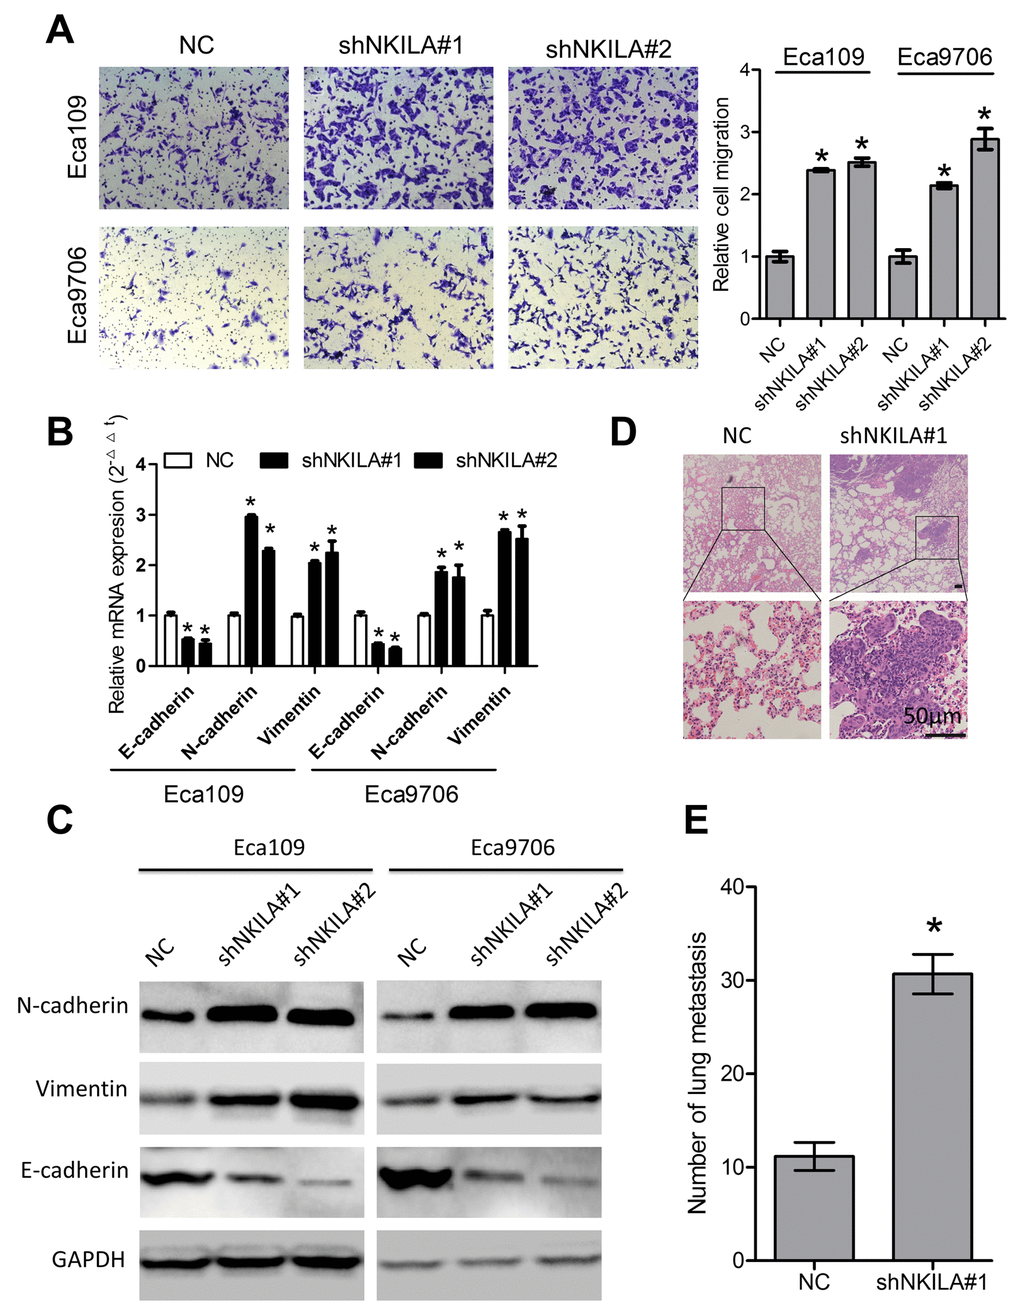 NKILA suppresses ESCC cell migration in vitro and lung metastasis in vivo. (A) Silencing NKILA in Eca109 and Eca9706 cells resulted in elevated cell migration. Left panel was representative images and right panel was statistical quantification. (B) Expression level of E-cadherin, N-cadherin and Vimentin in Eca109 and Eca9706 cells after knockdown of NKILA was detected by qPCR. (C) Expression level of E-cadherin, N-cadherin and Vimentin in Eca109 and Eca9706 cells after knockdown of NKILA was detected by western blot. (D) Representative H&E staining of lung tissue sections. Scale bars: 50μm. (E) The micro-metastasis in the lung was numbered. Data in A and B represents the mean ± SD of three repeated experiments. Data in E represents the mean ± SD of six mice. *P 